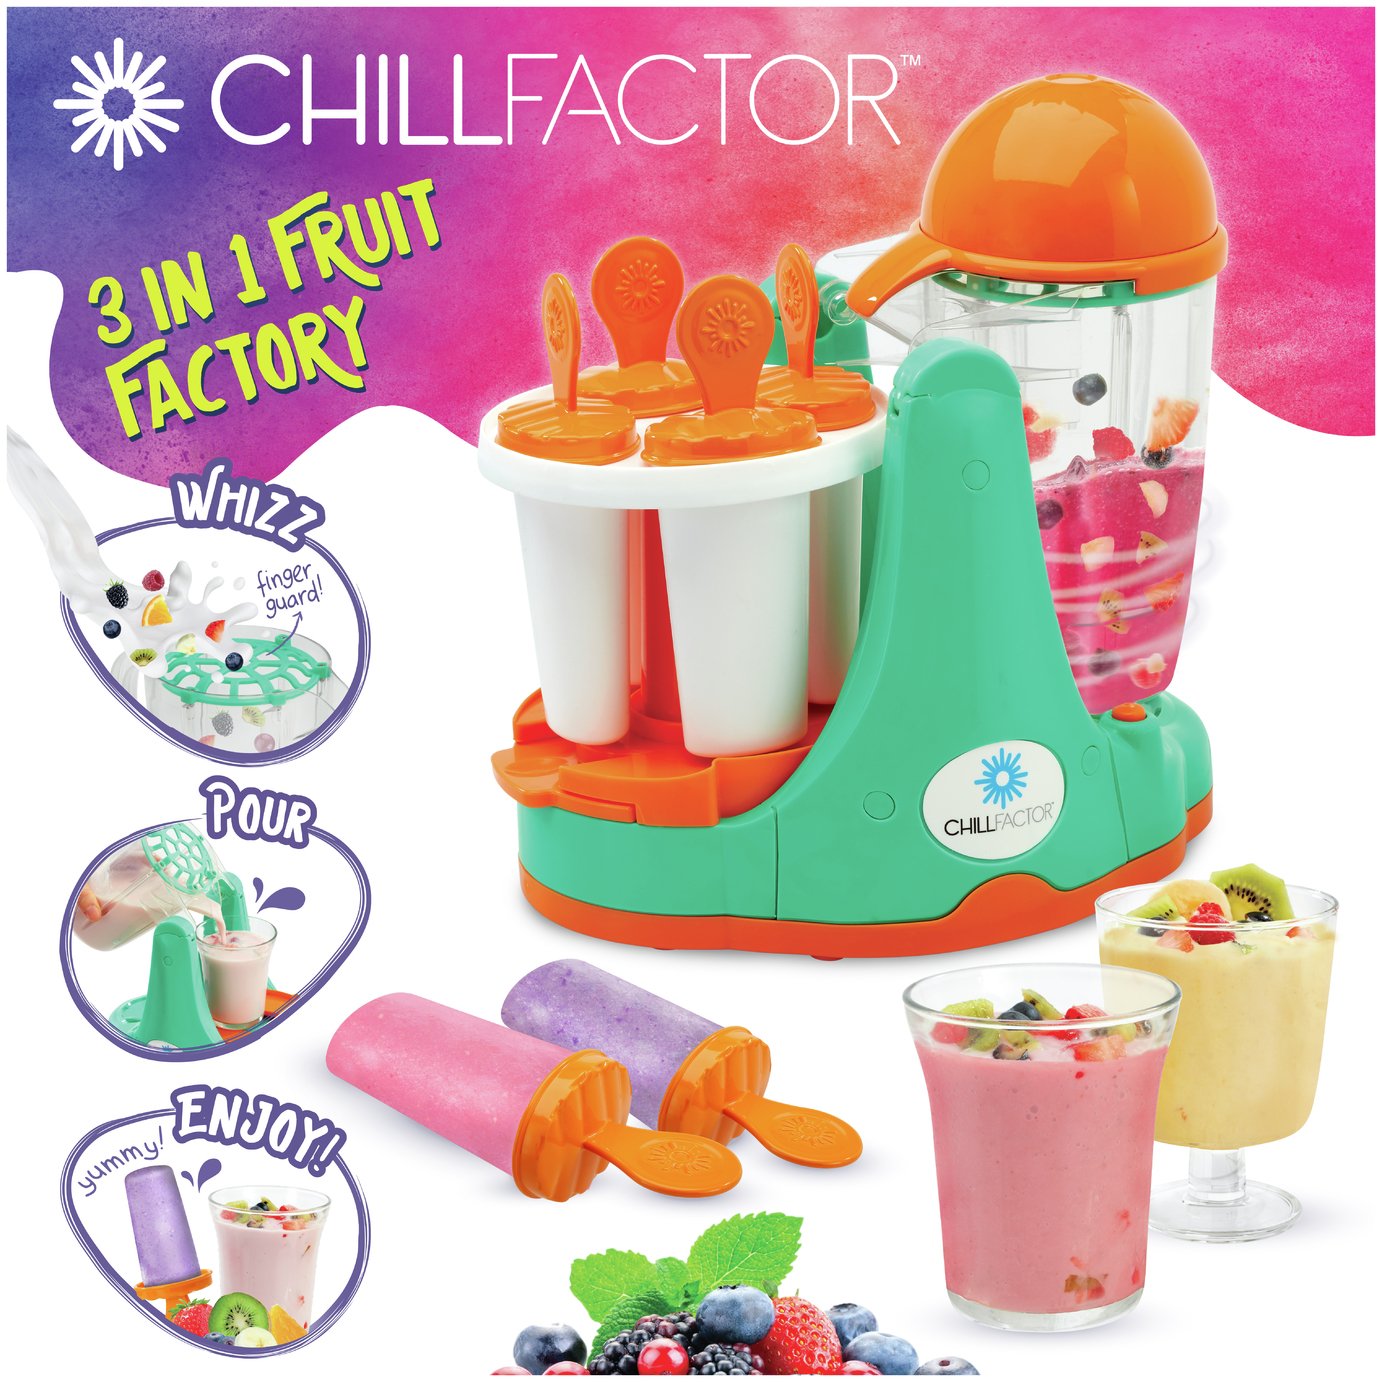 Chill Factor 3 in 1 Fruit Factory review